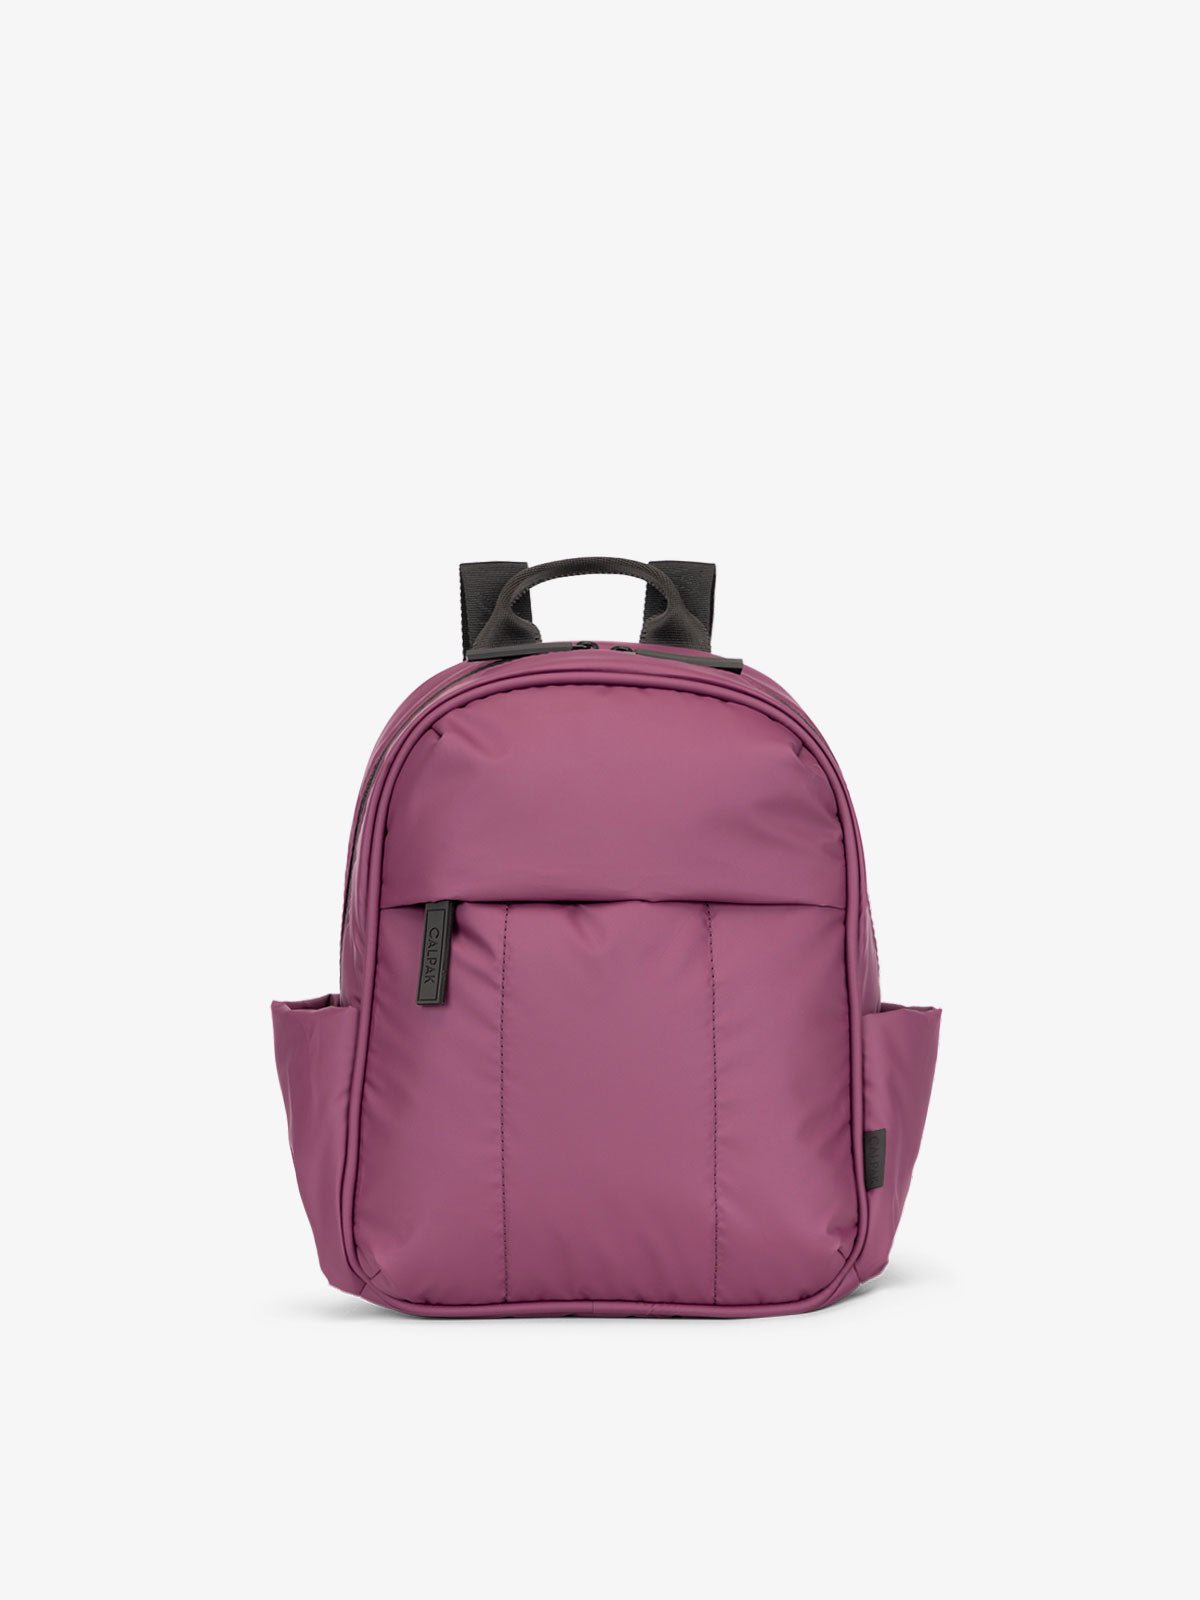 CALPAK Luka Mini Backpack with soft puffy exterior and front zippered pocket purple plum